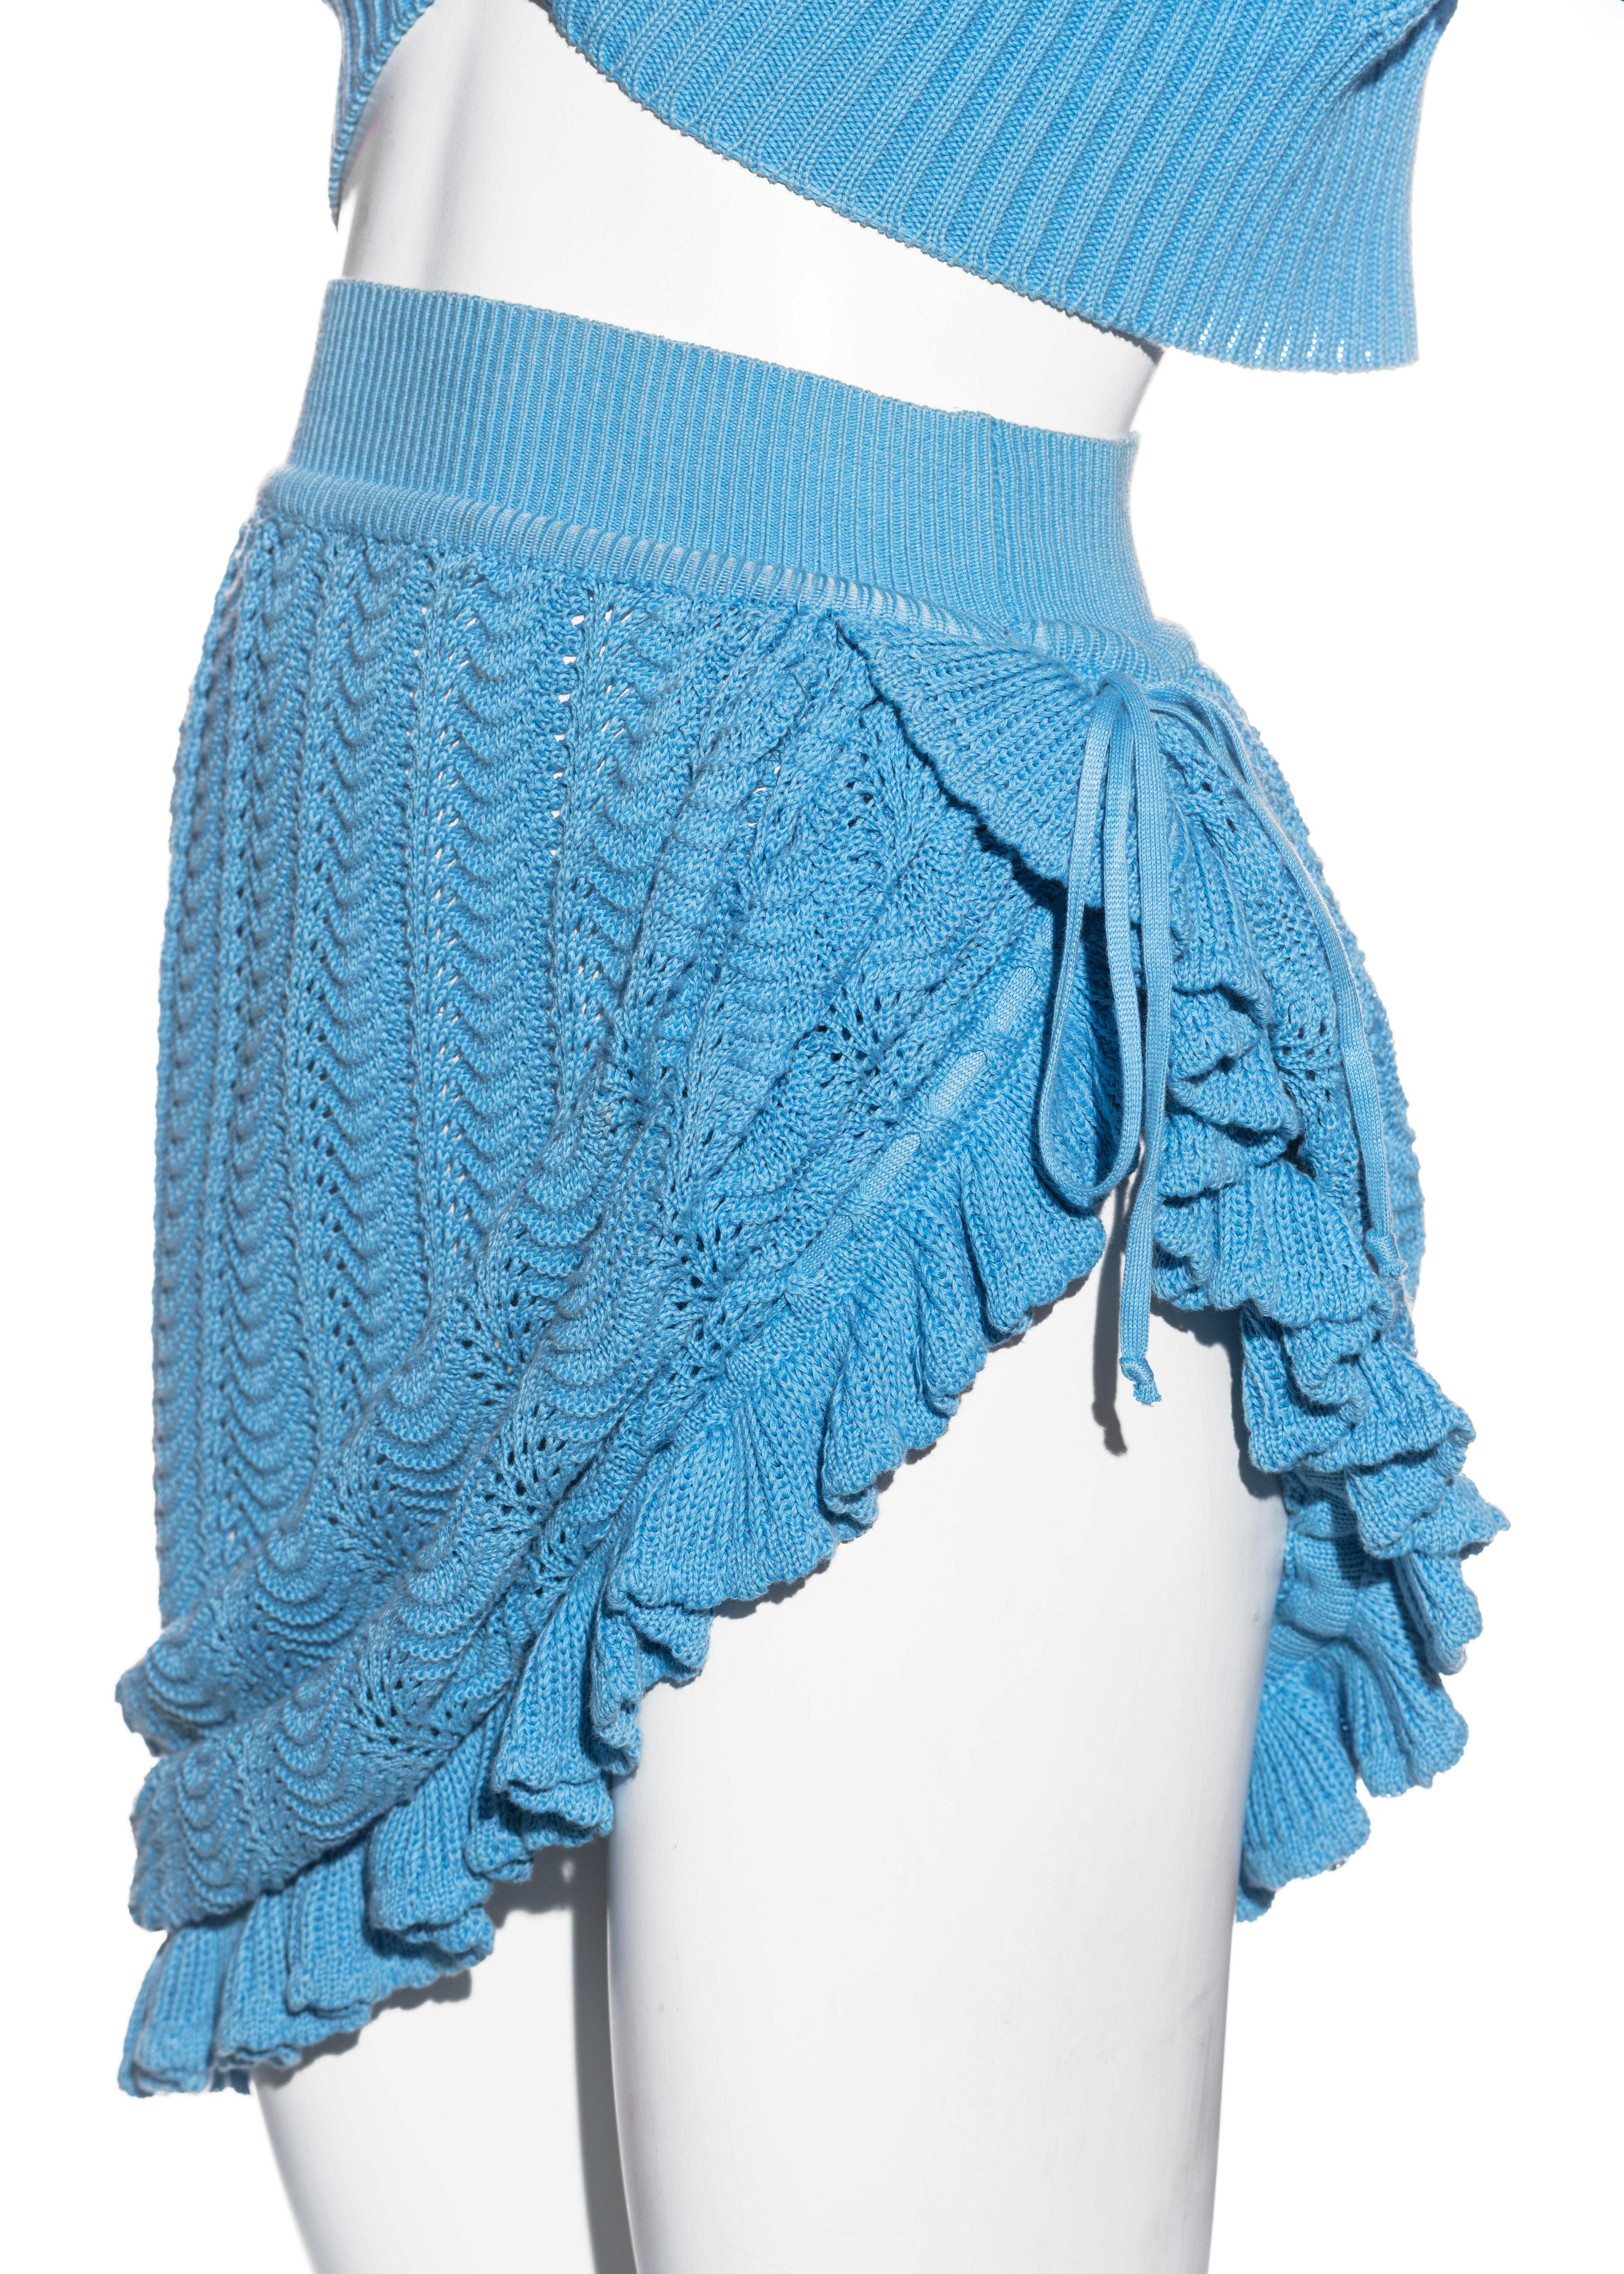 ▪ Vivienne Westwood blue crochet-knit skirt and cardigan set
▪ 100% Cotton
▪ Large orb etched button fastening 
▪ Gathered pleats on shoulders 
▪ Ribbing on cuffs, waistband, and lapel 
▪ Convertible drawstring runs along with hemline meeting at the